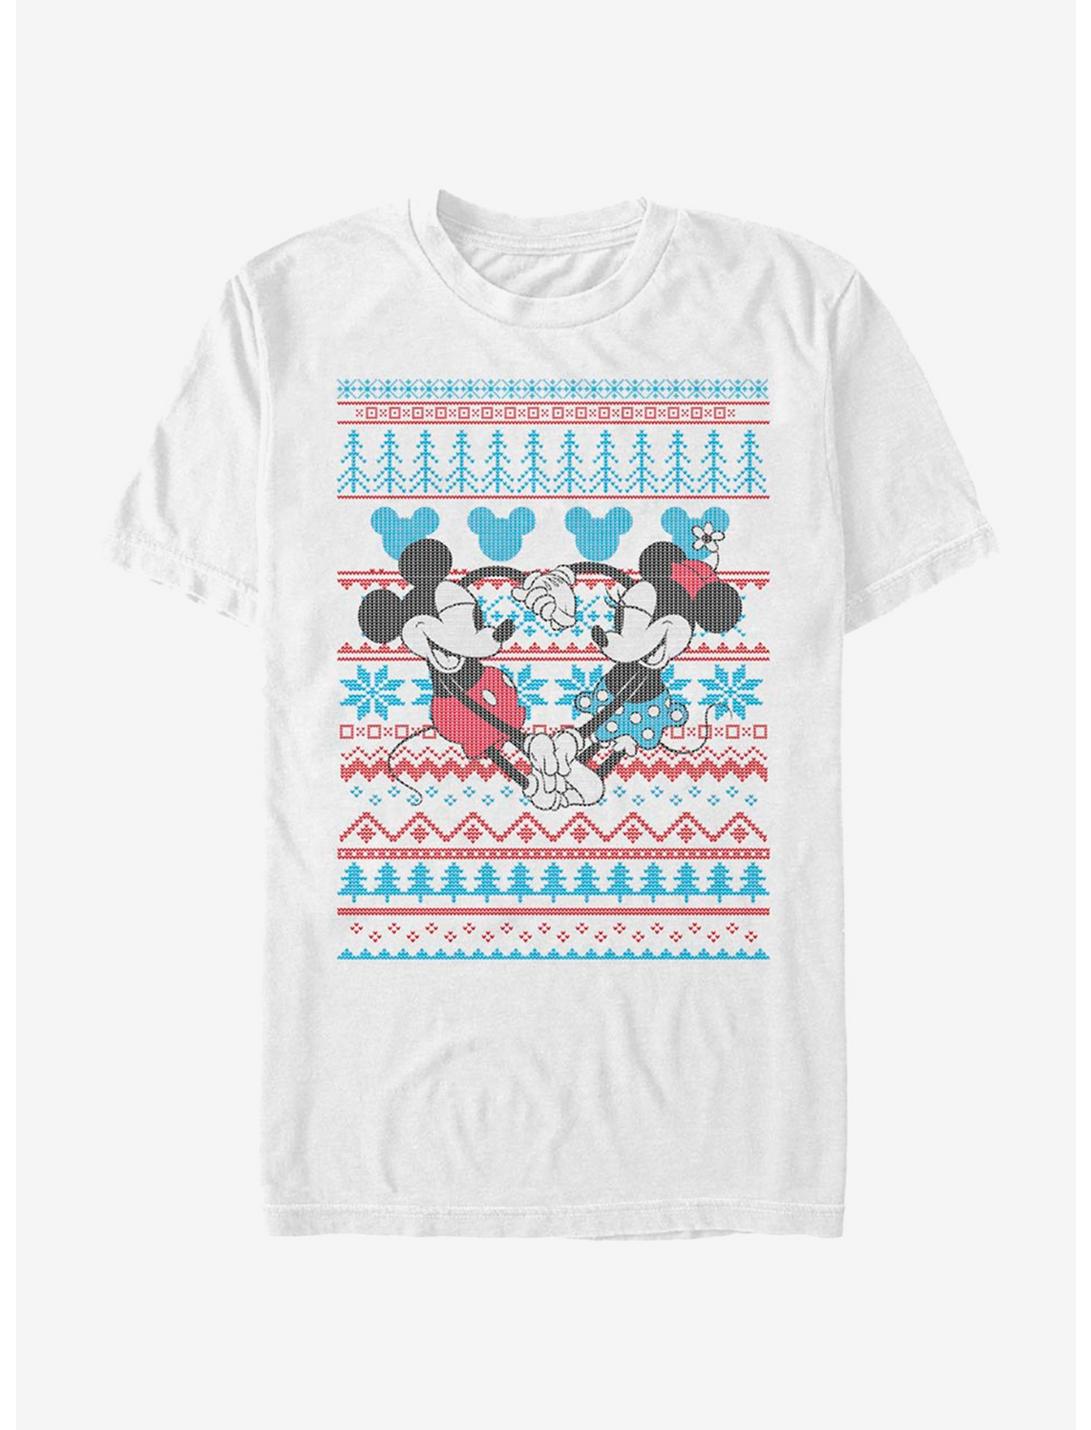 Disney Mickey Mouse & Minnie Sweater T-Shirt, WHITE, hi-res